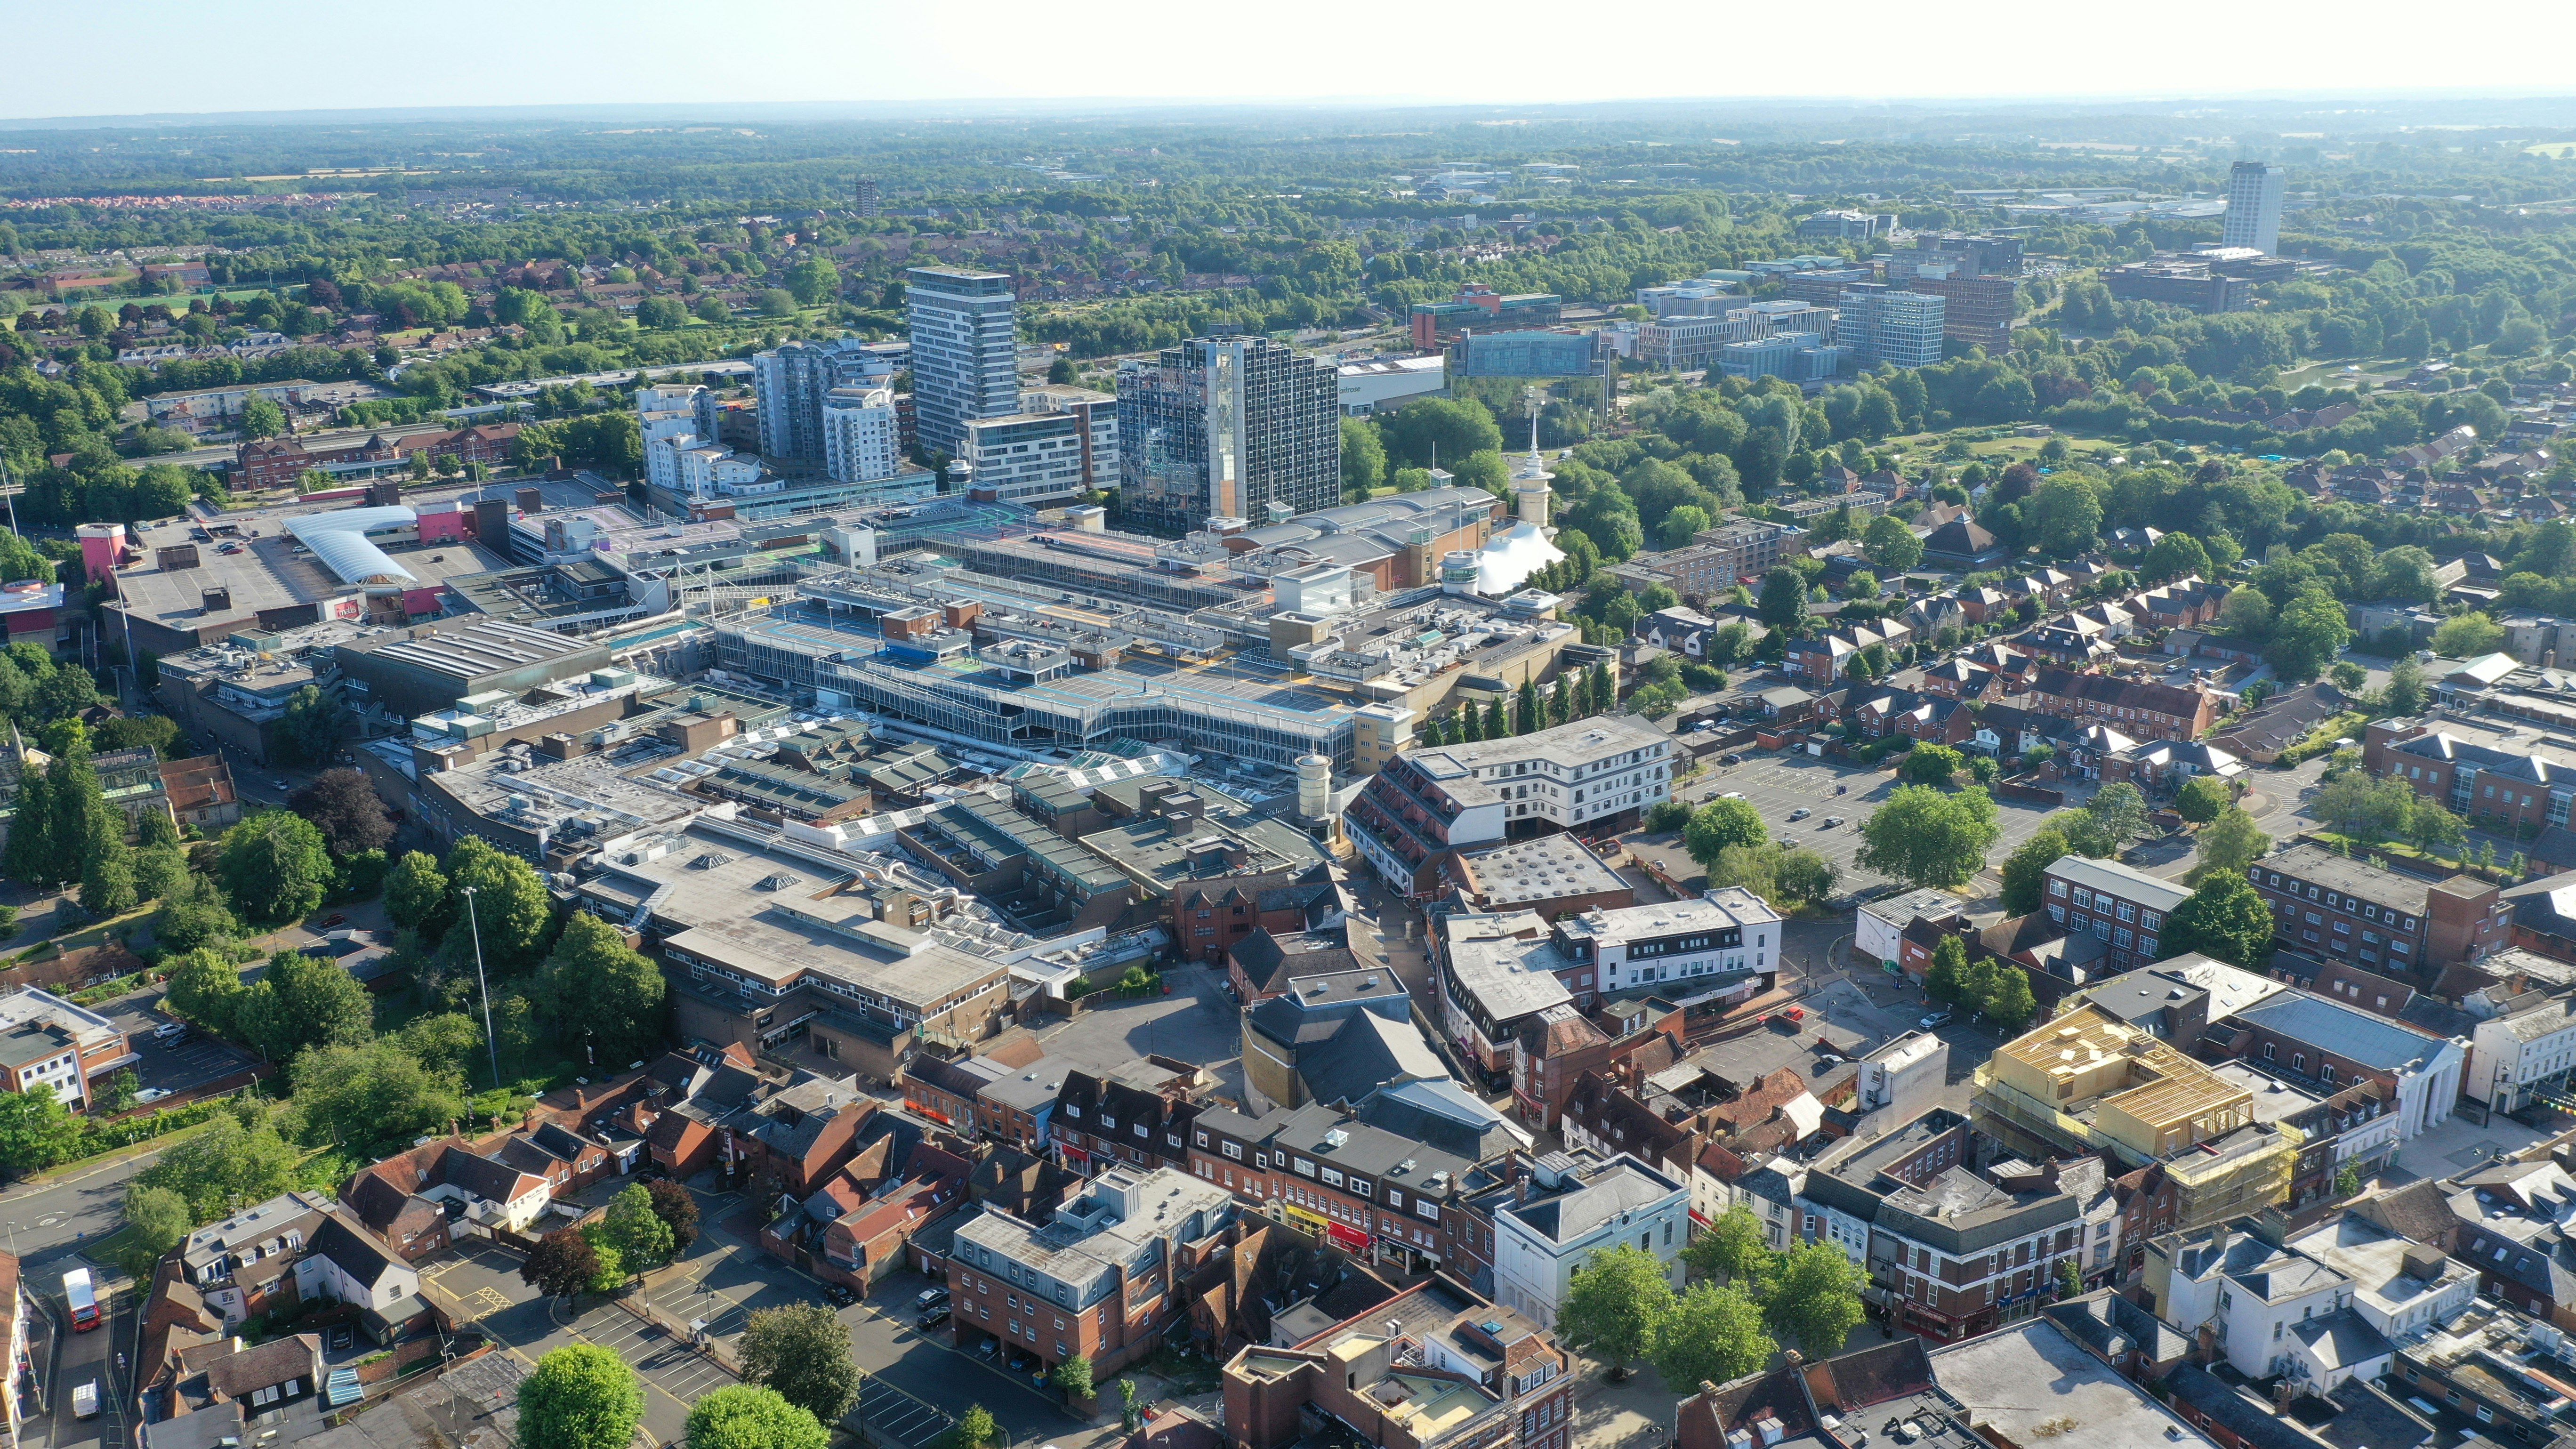 You can see Basingstoke town centre from the air